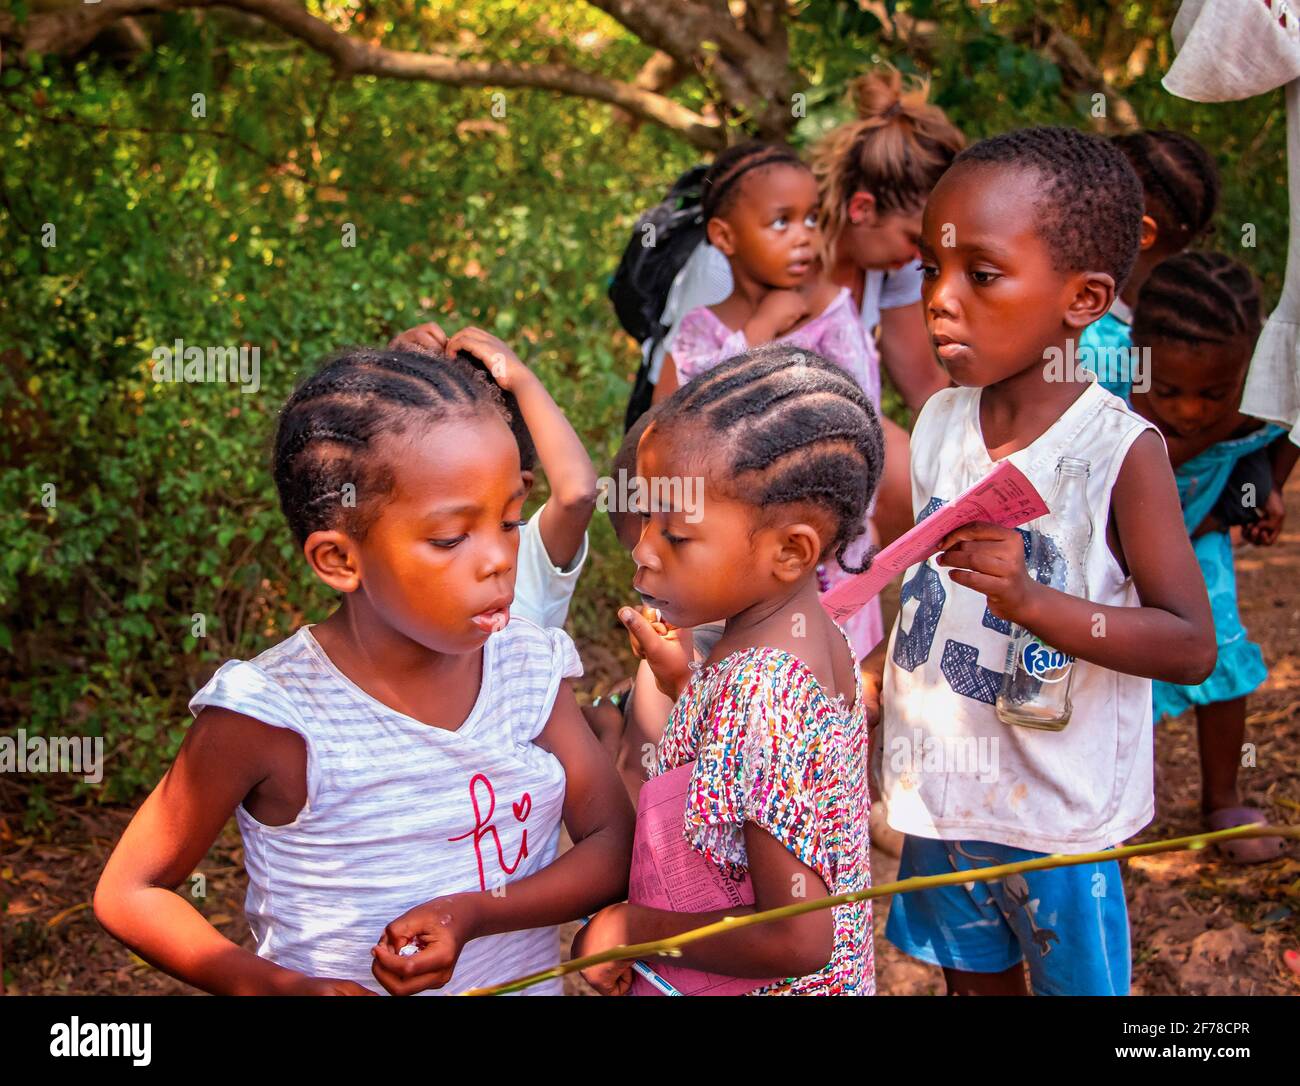 Wasini island, Kenya, AFRICA - February 26, 2020: Little local children begging for sweets from tourists on Wasini island, Kenya. This is happening in Stock Photo